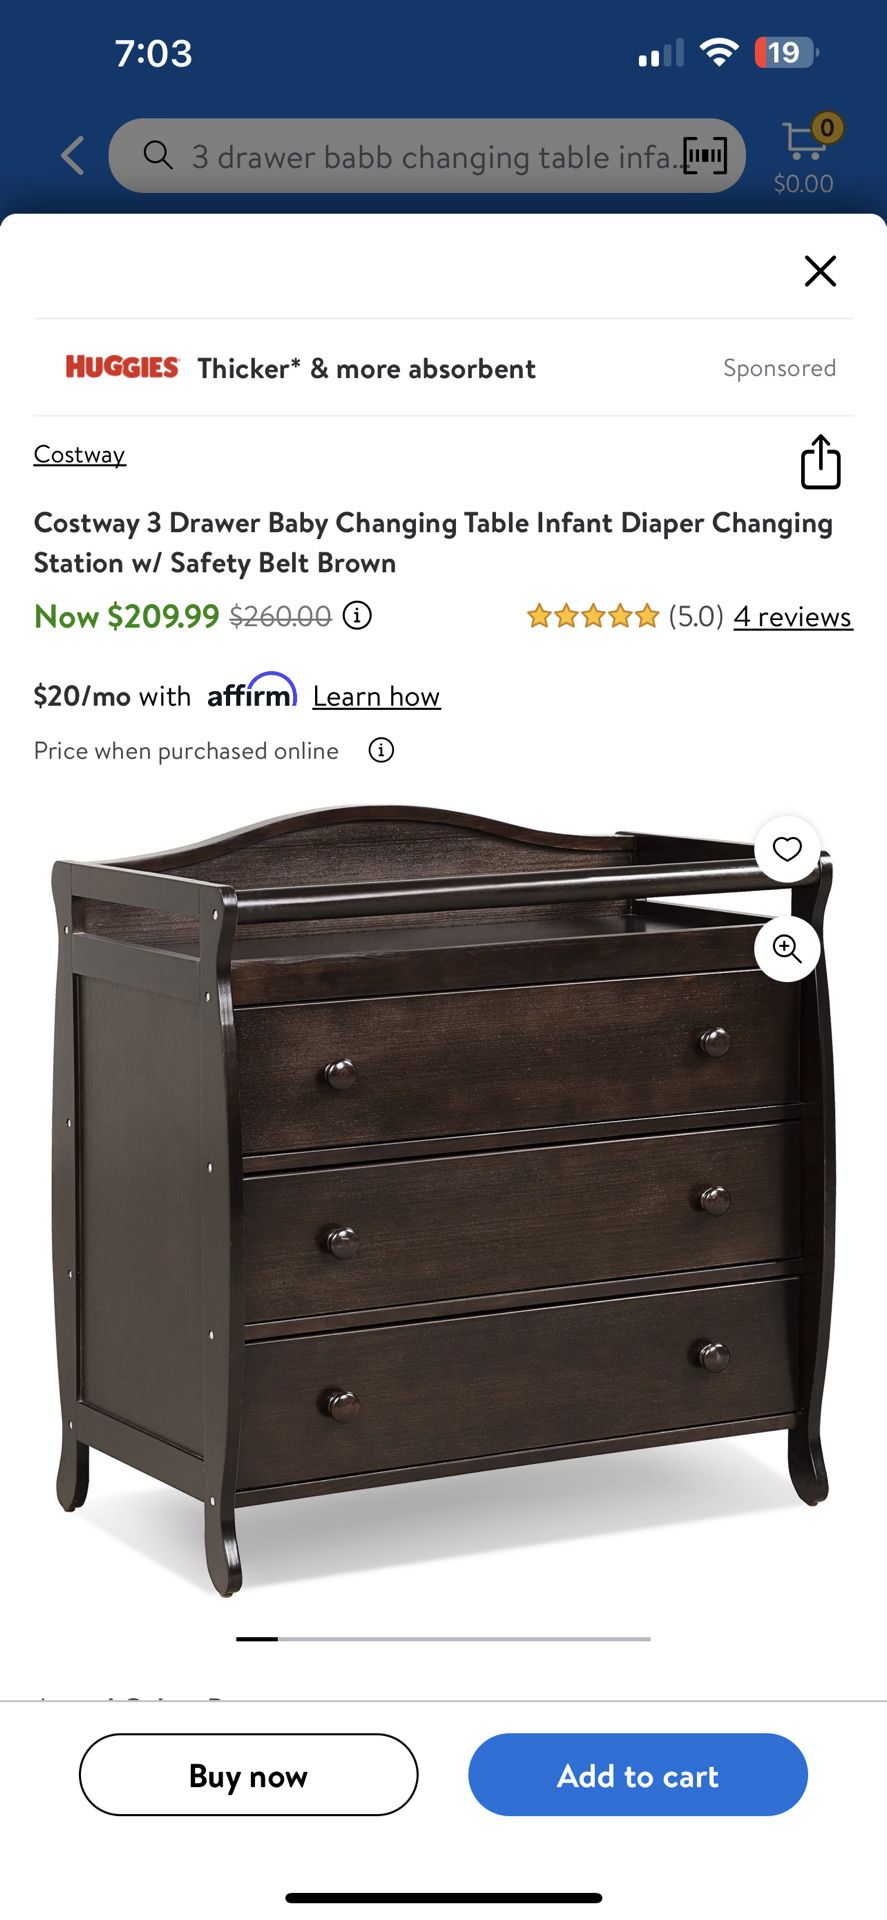 Costway 3 Drawer Baby Changing Table Infant Diaper Changing Station w/ Safety Belt Brown